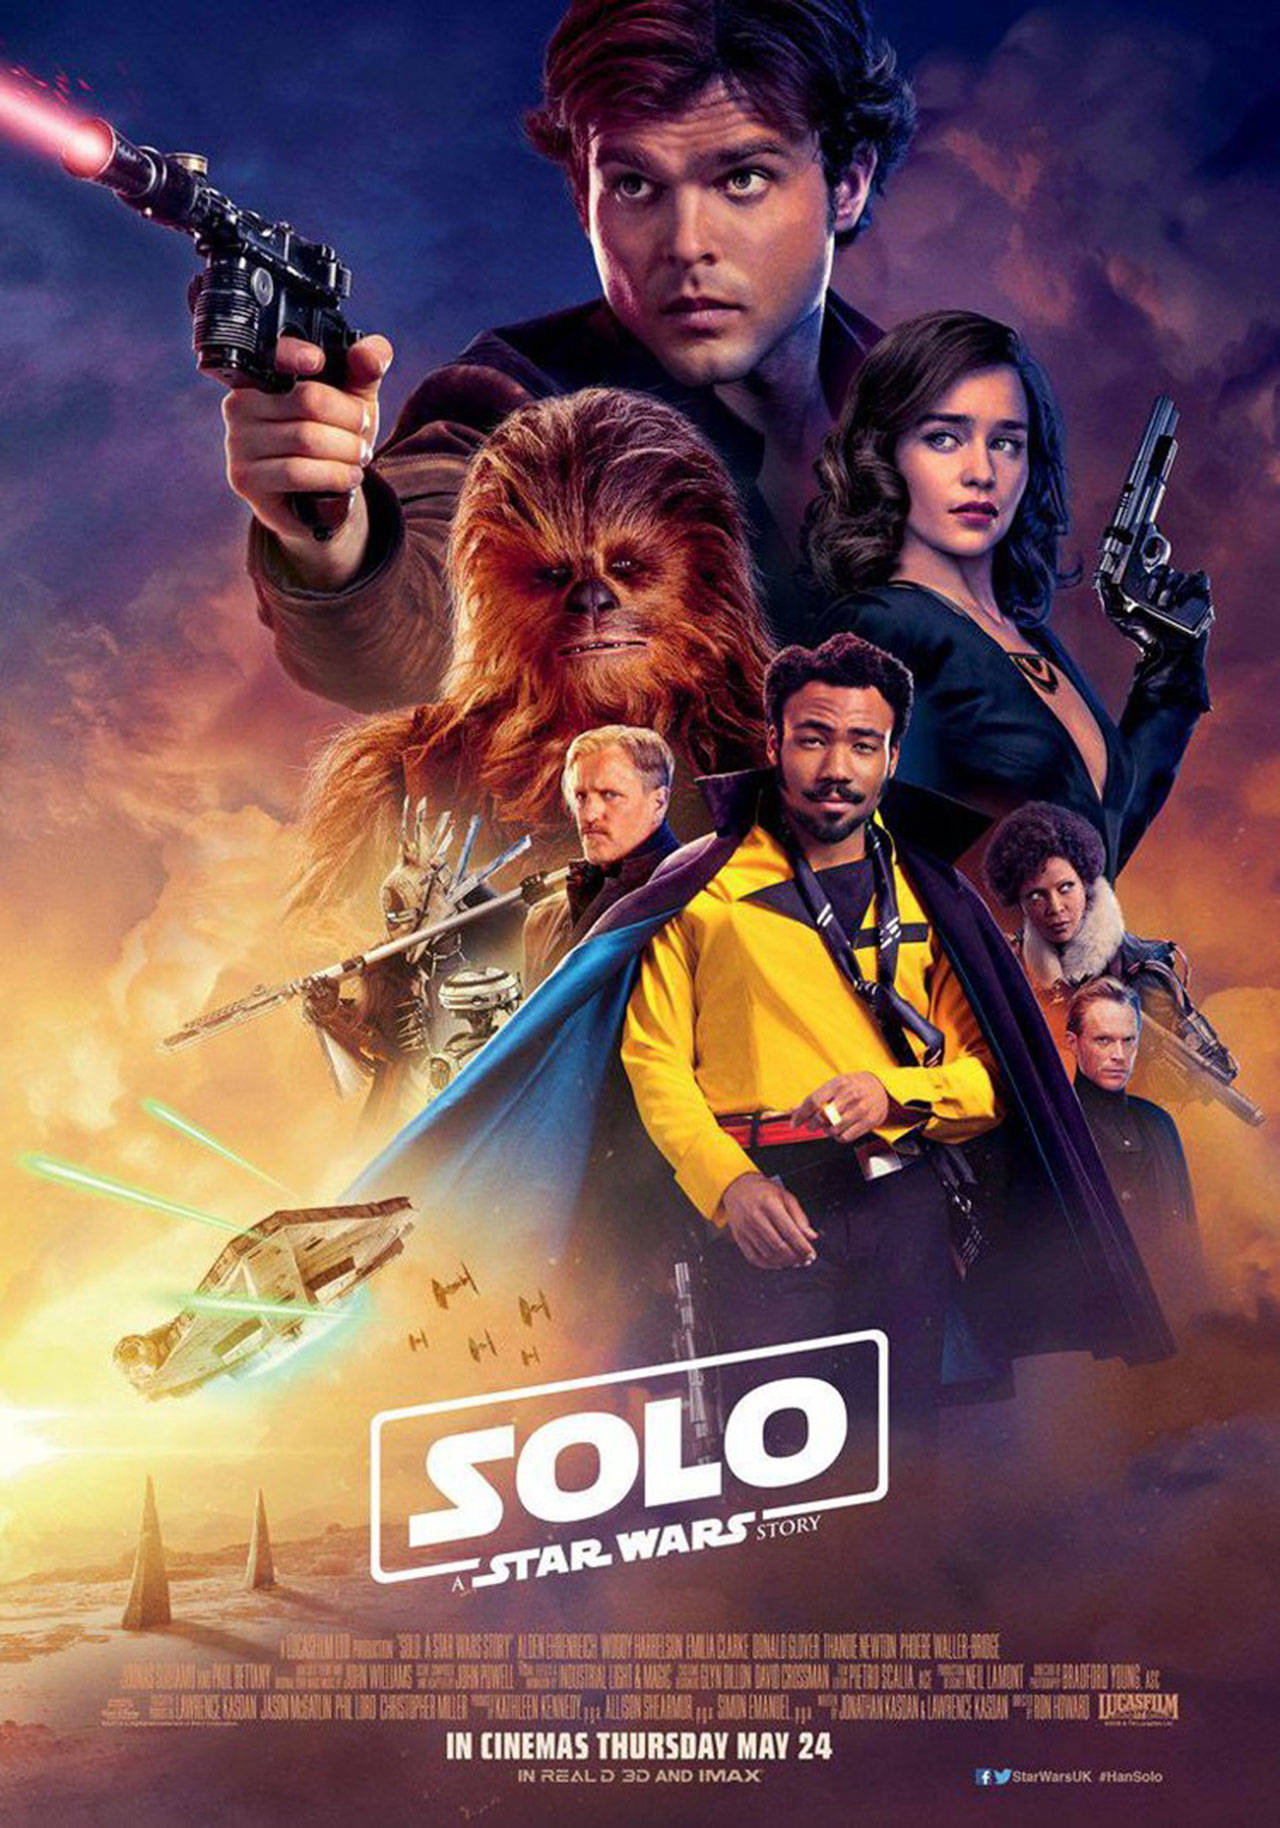 Image courtesy of Walt Disney Studios Motion Pictures | The latest installment in the ever-expanding Star Wars cinematic universe, “Solo: A Star Wars Story,” will screen at Bainbridge Cinemas at 7 p.m. Thursday, May 24.